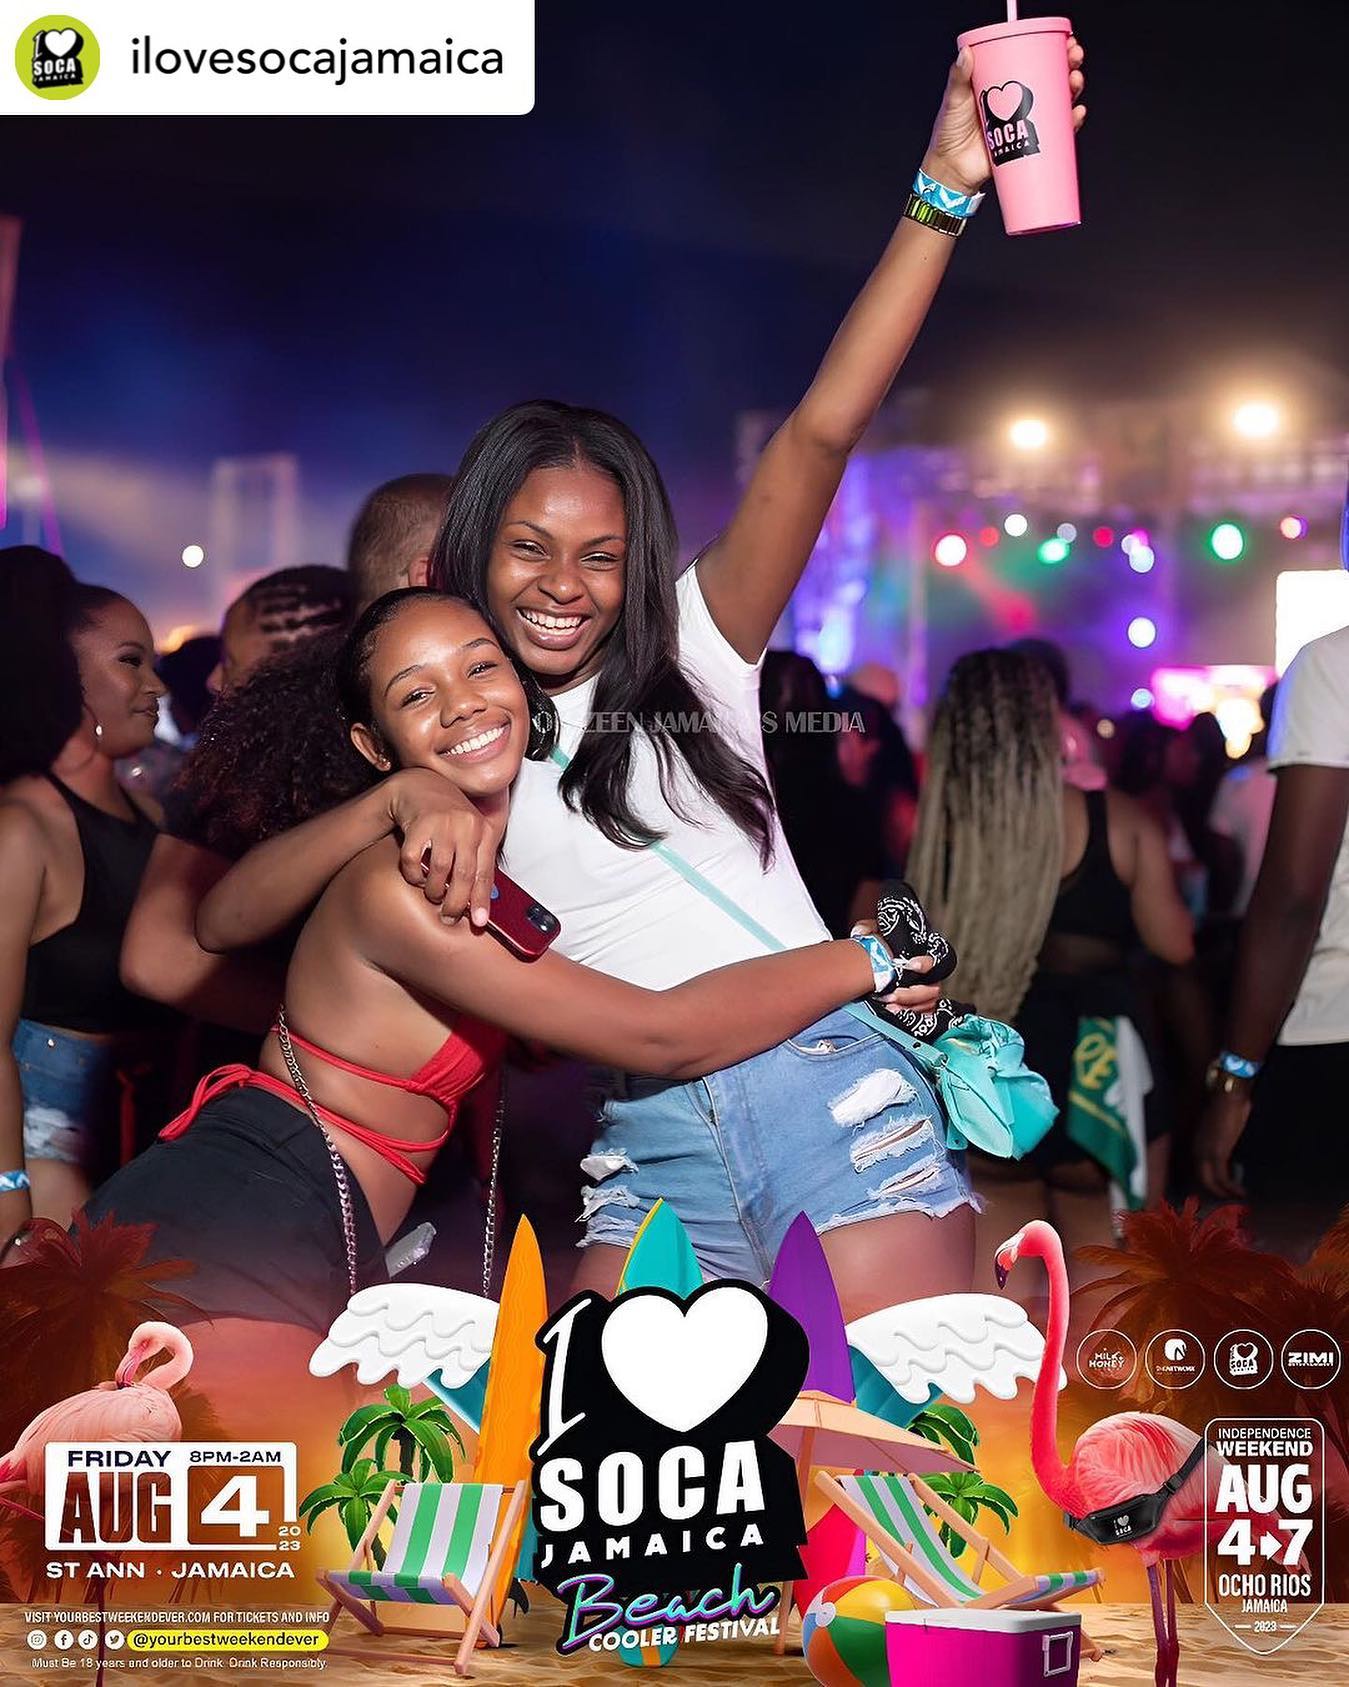 No friend left behind! 🏖 

@ilovesocajamaica BEACH COOLER FESTIVAL.

i LOVE SOCA JA’ BEACH 😎 
@yourbestweekendever 
Friday, Aug 4th 2023,
St Ann 🇯🇲

SECURE your ($55USD) EARLY-BIRD TICKETS

To purchase tickets, visit: Ticketgateway.com/ilovesocajamaica

 @visitjamaica